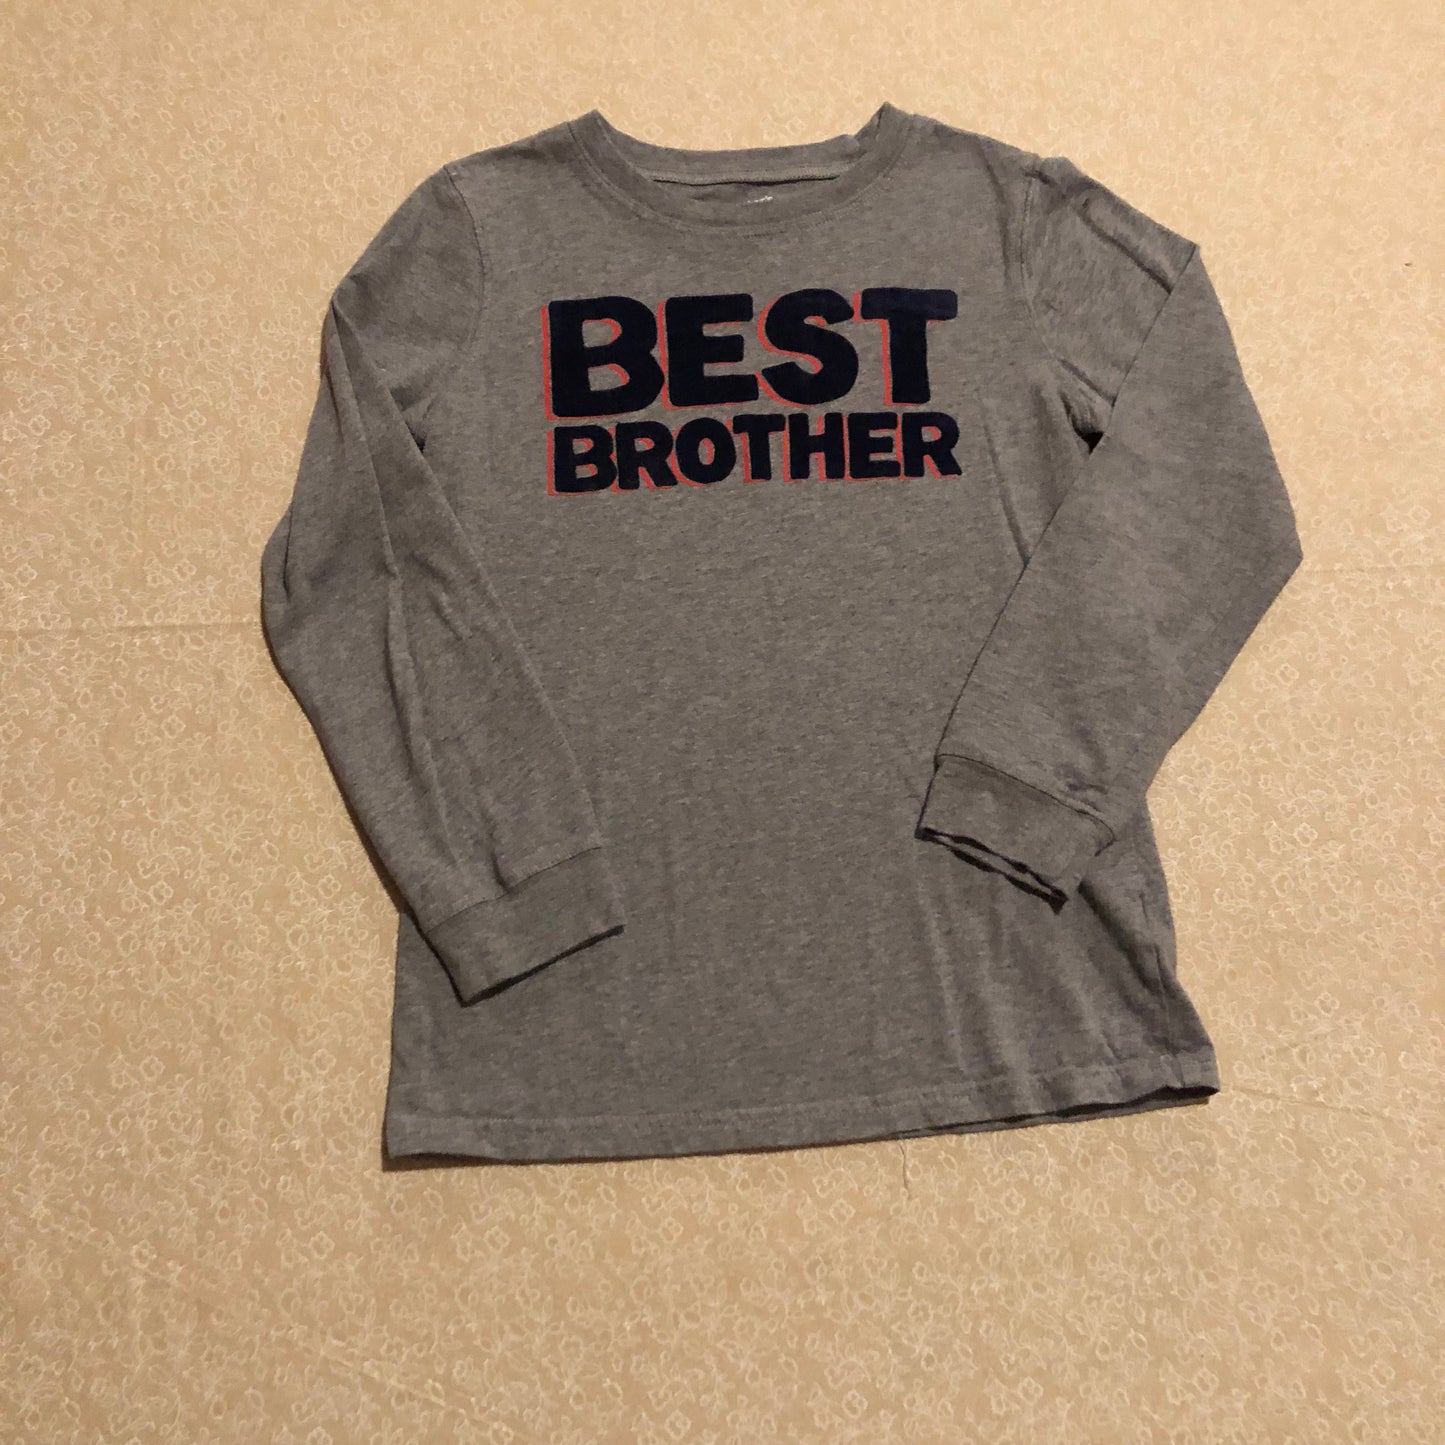 10-shirts-carters-grey-best-brother-long-sleeve